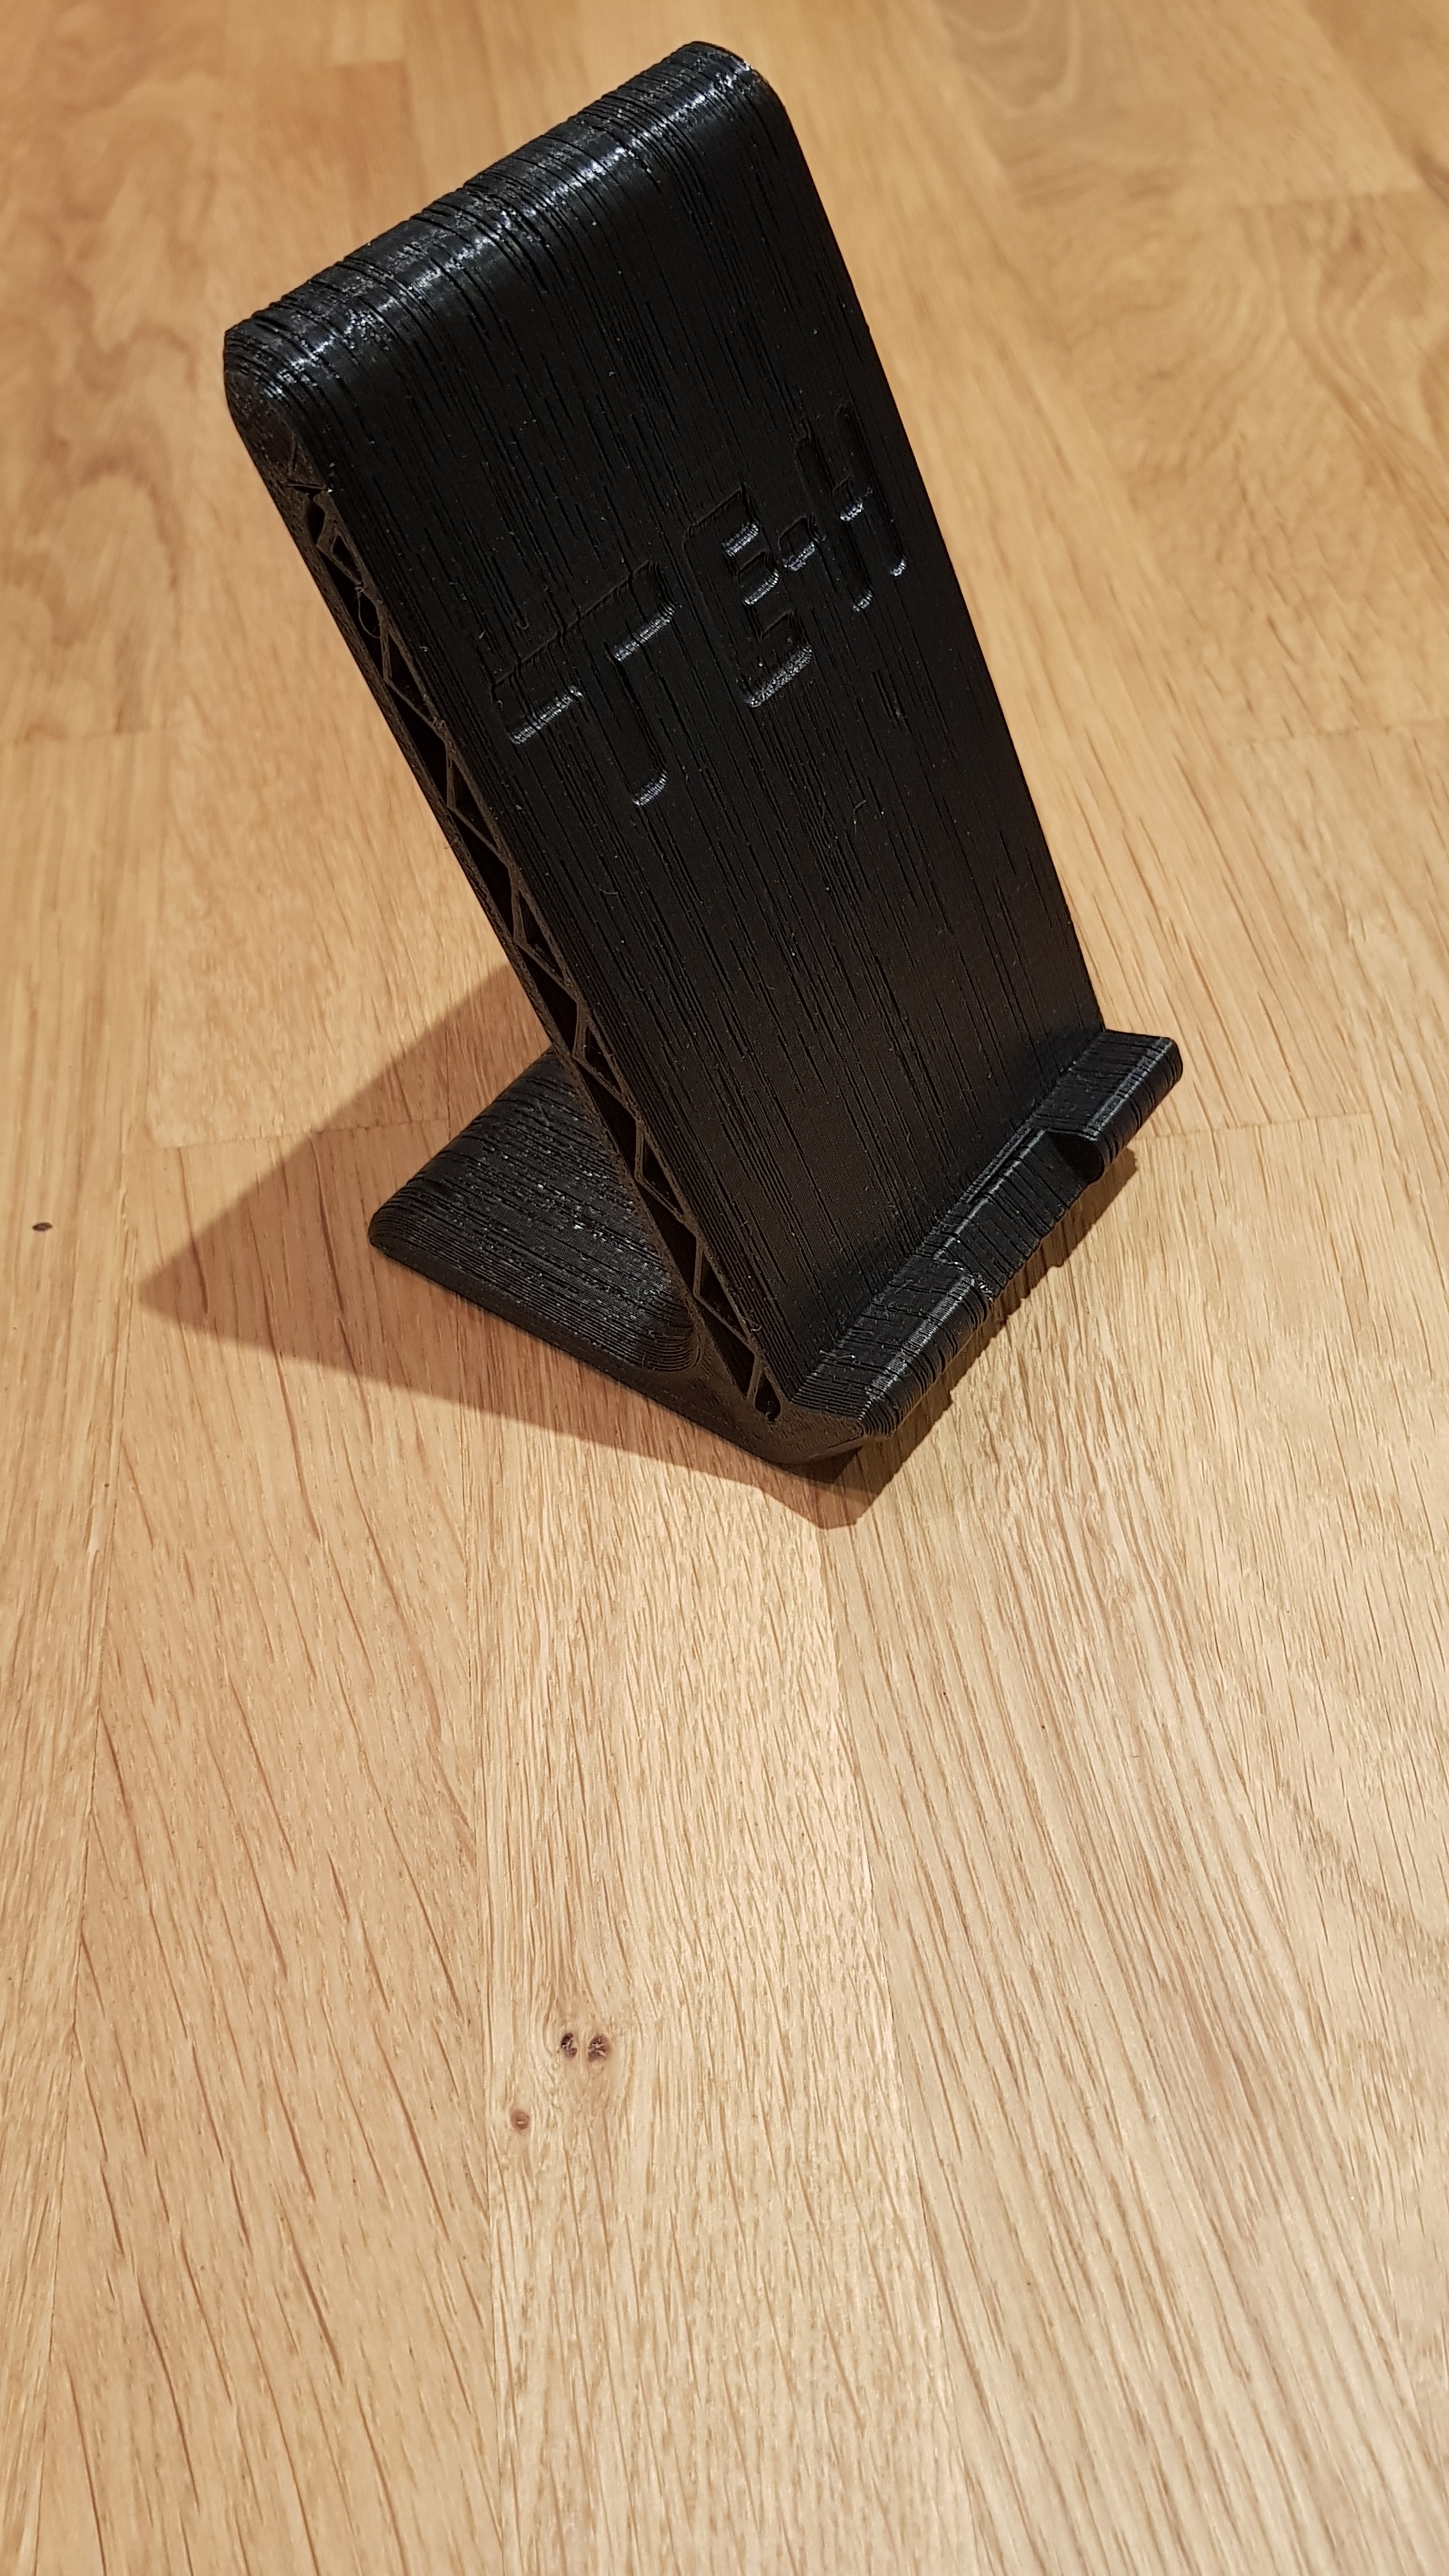 phone stand: product design project from school